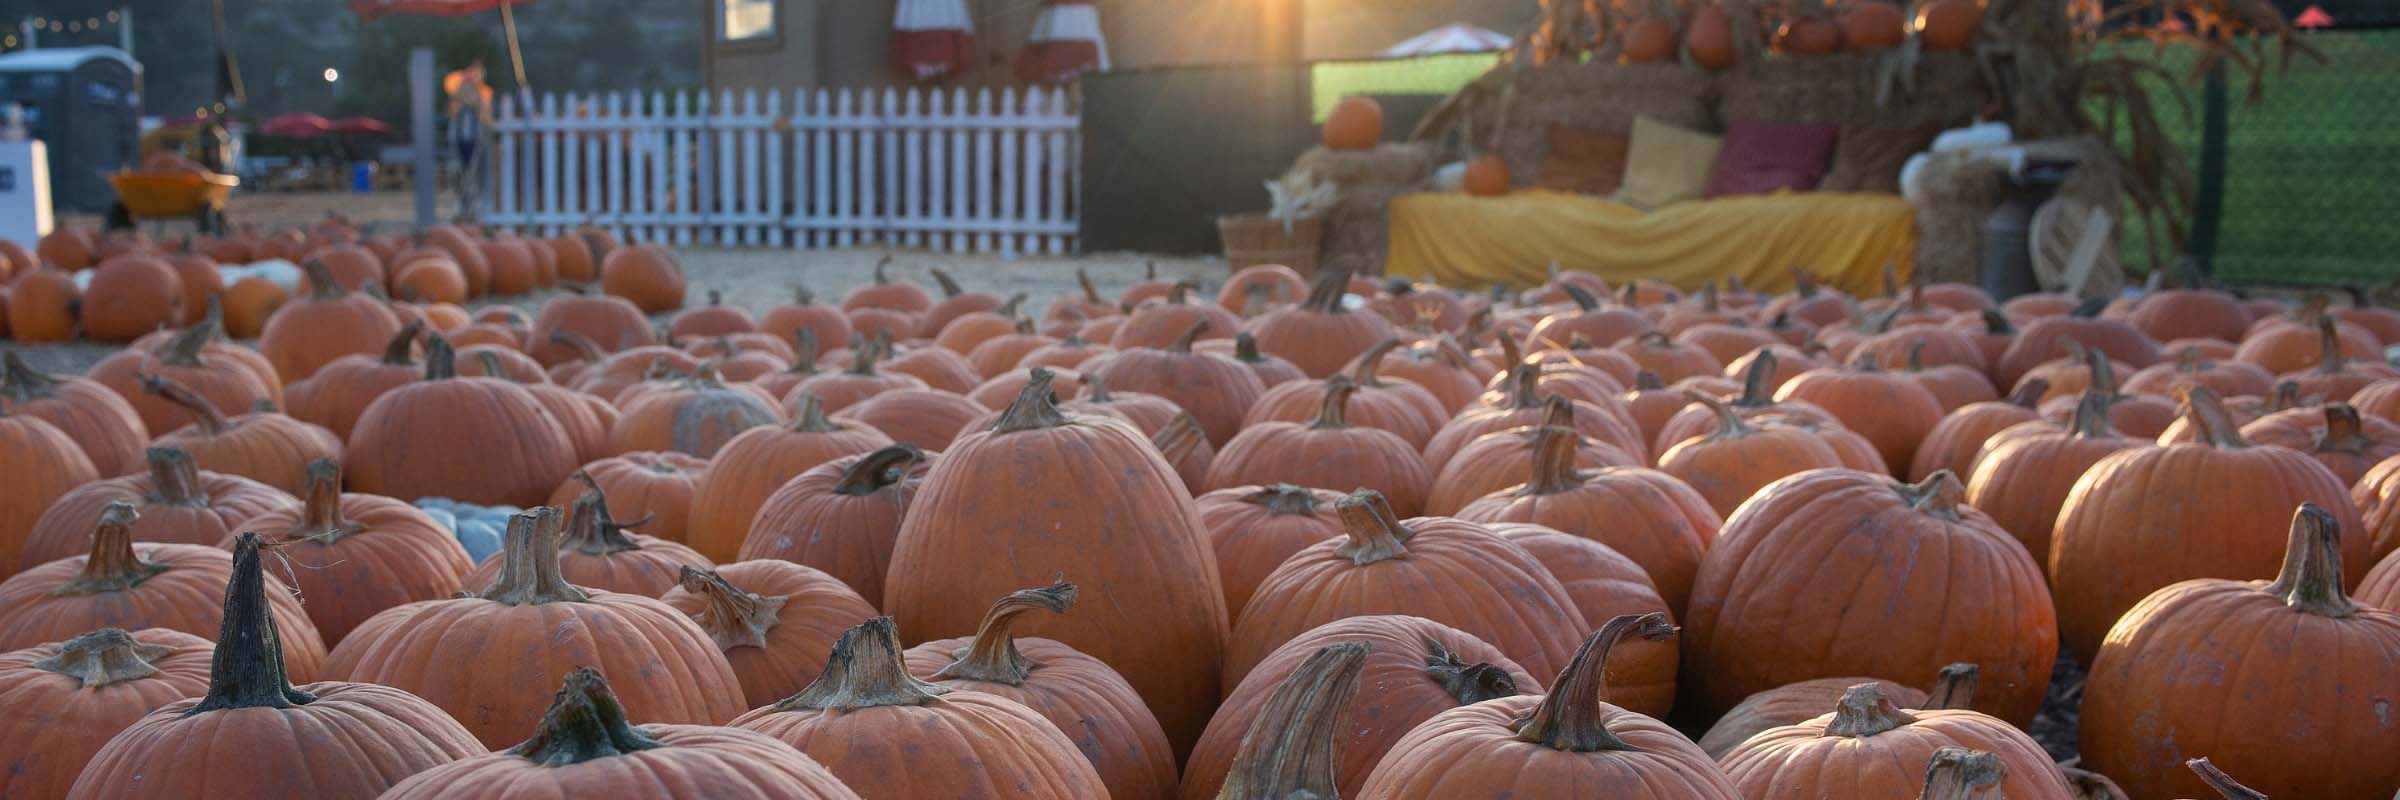 Pumpkins lay on the ground during the Pumpkin Fest